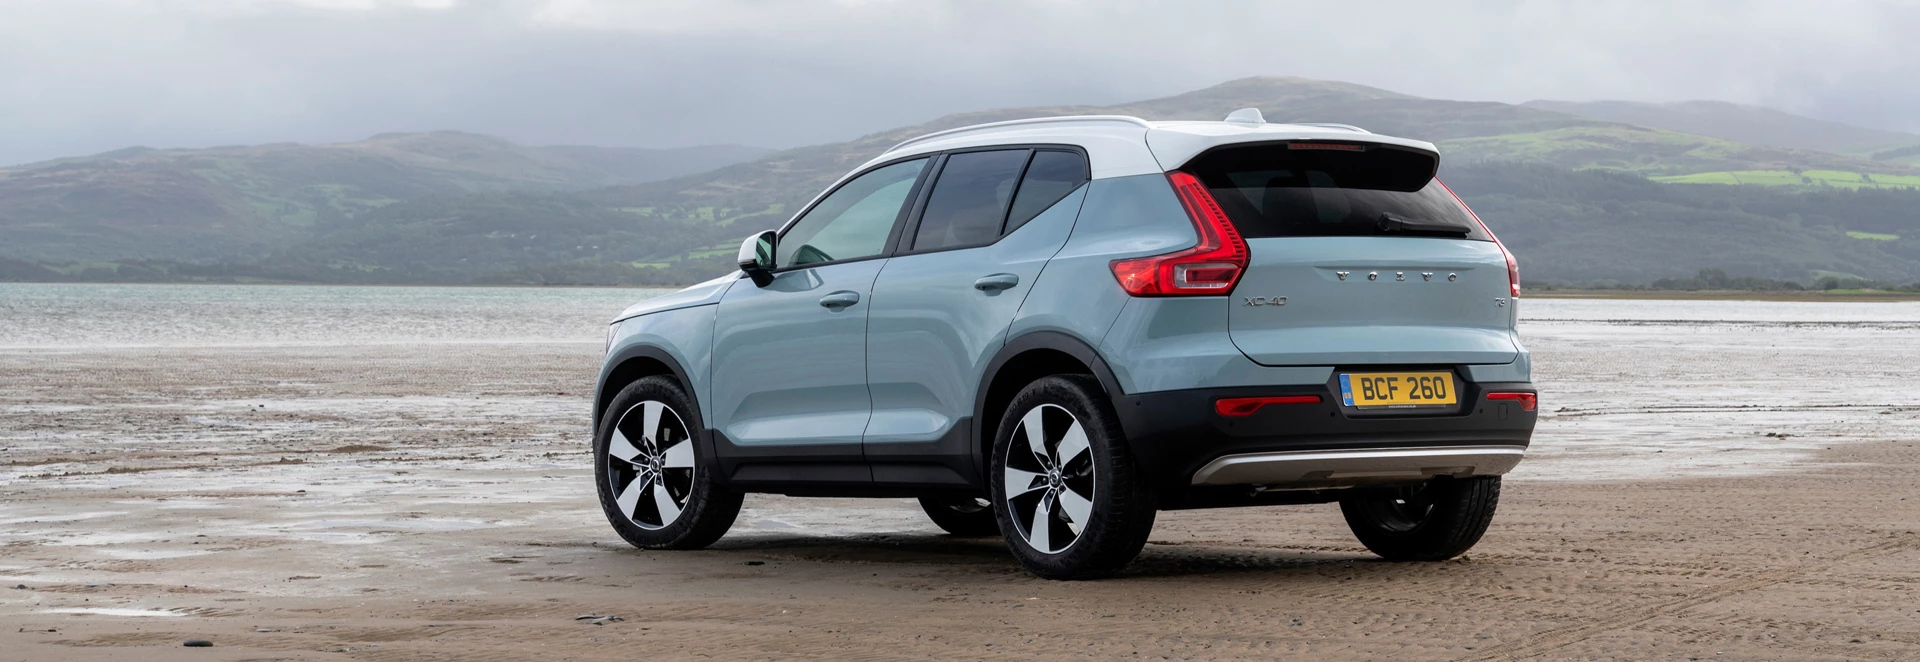 Top 10 safest SUVs for sale in 2019 